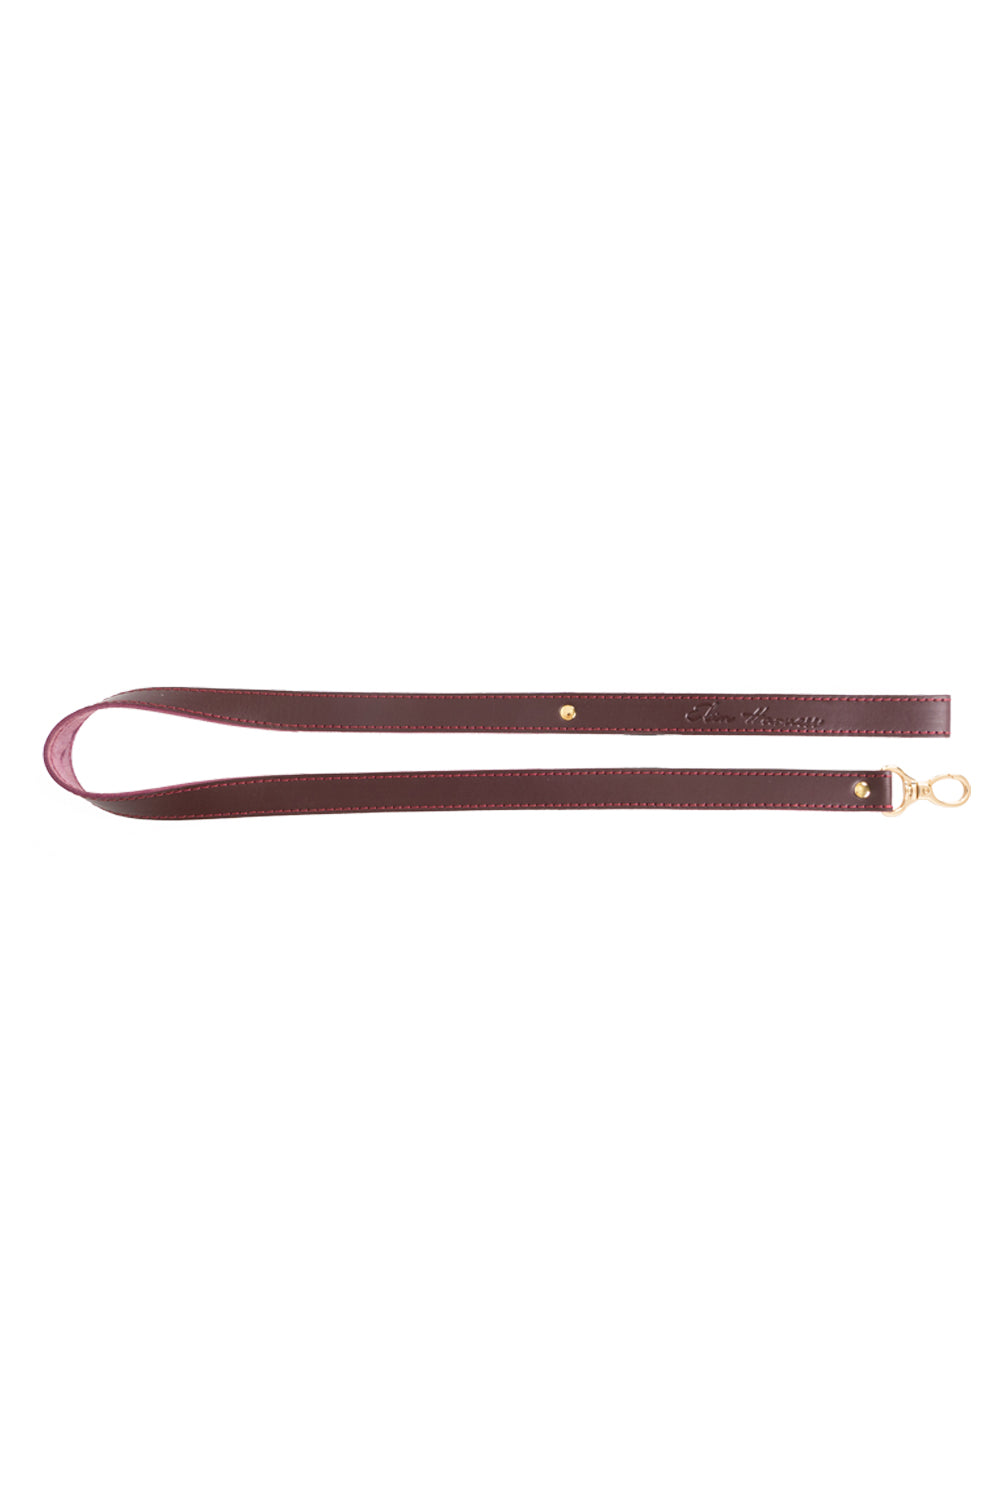 Leather leash. Pink